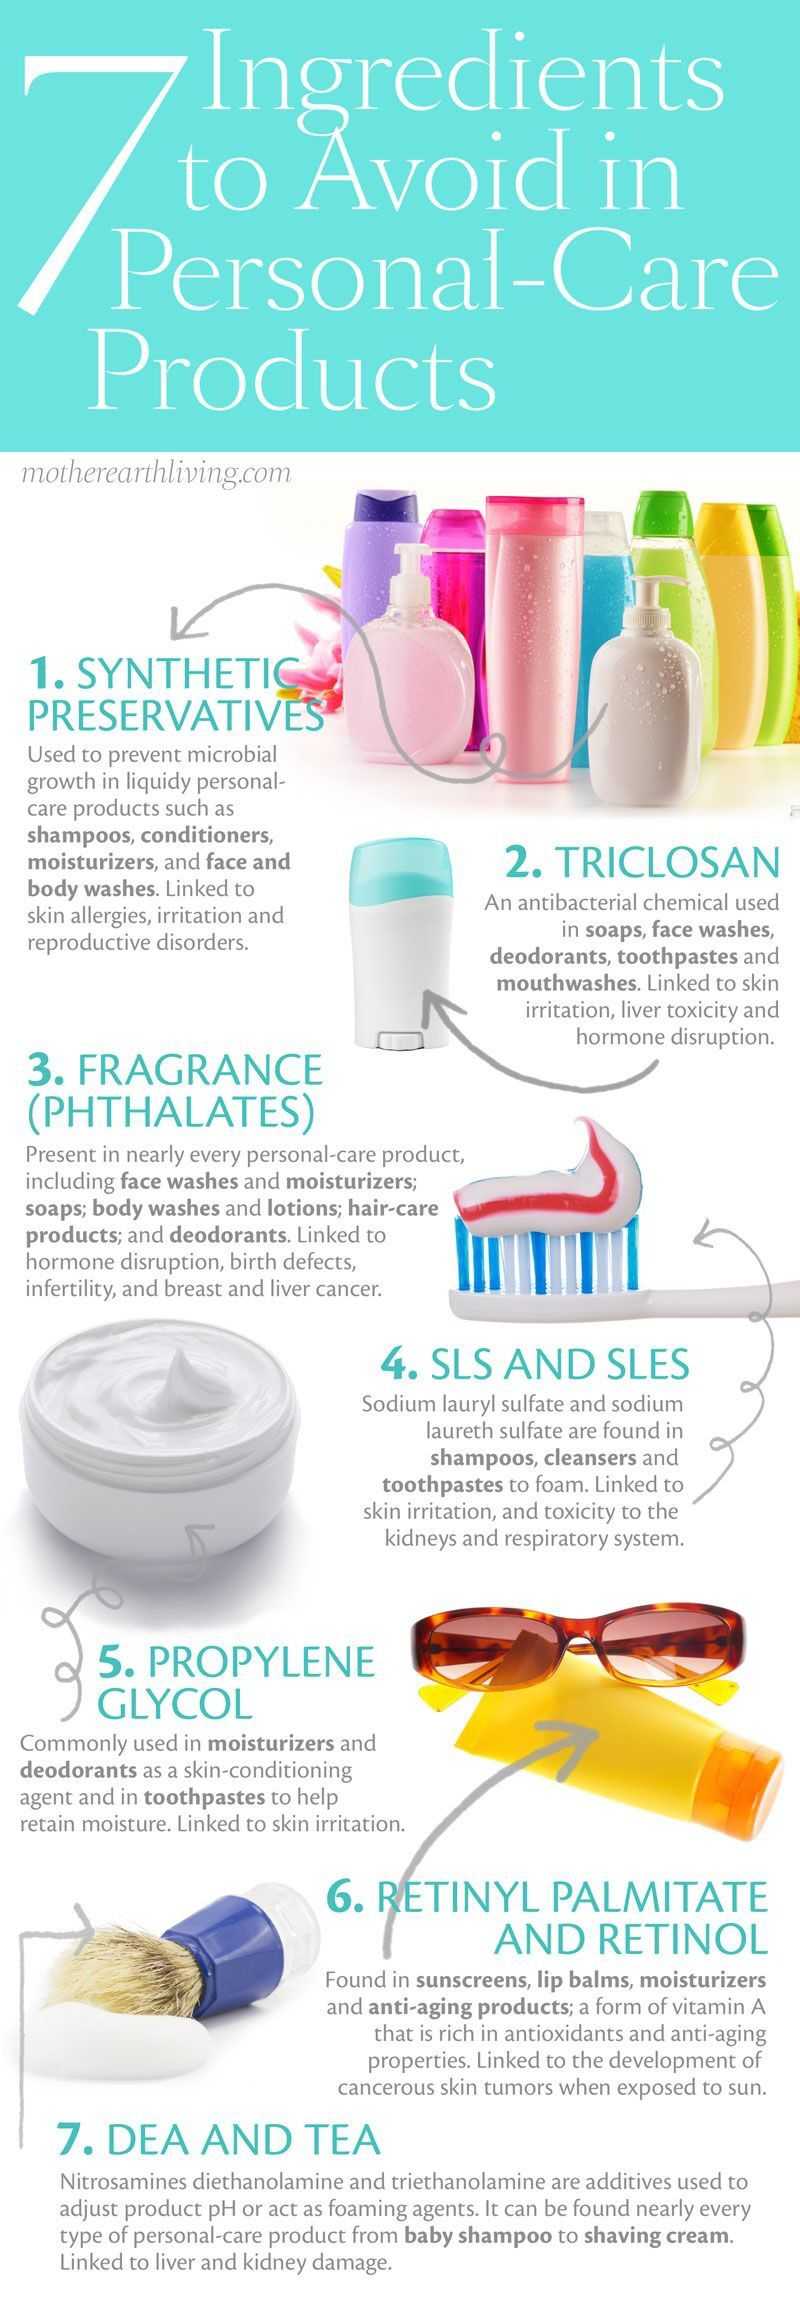 7 Ingredients To Avoid In Personal-Care Products